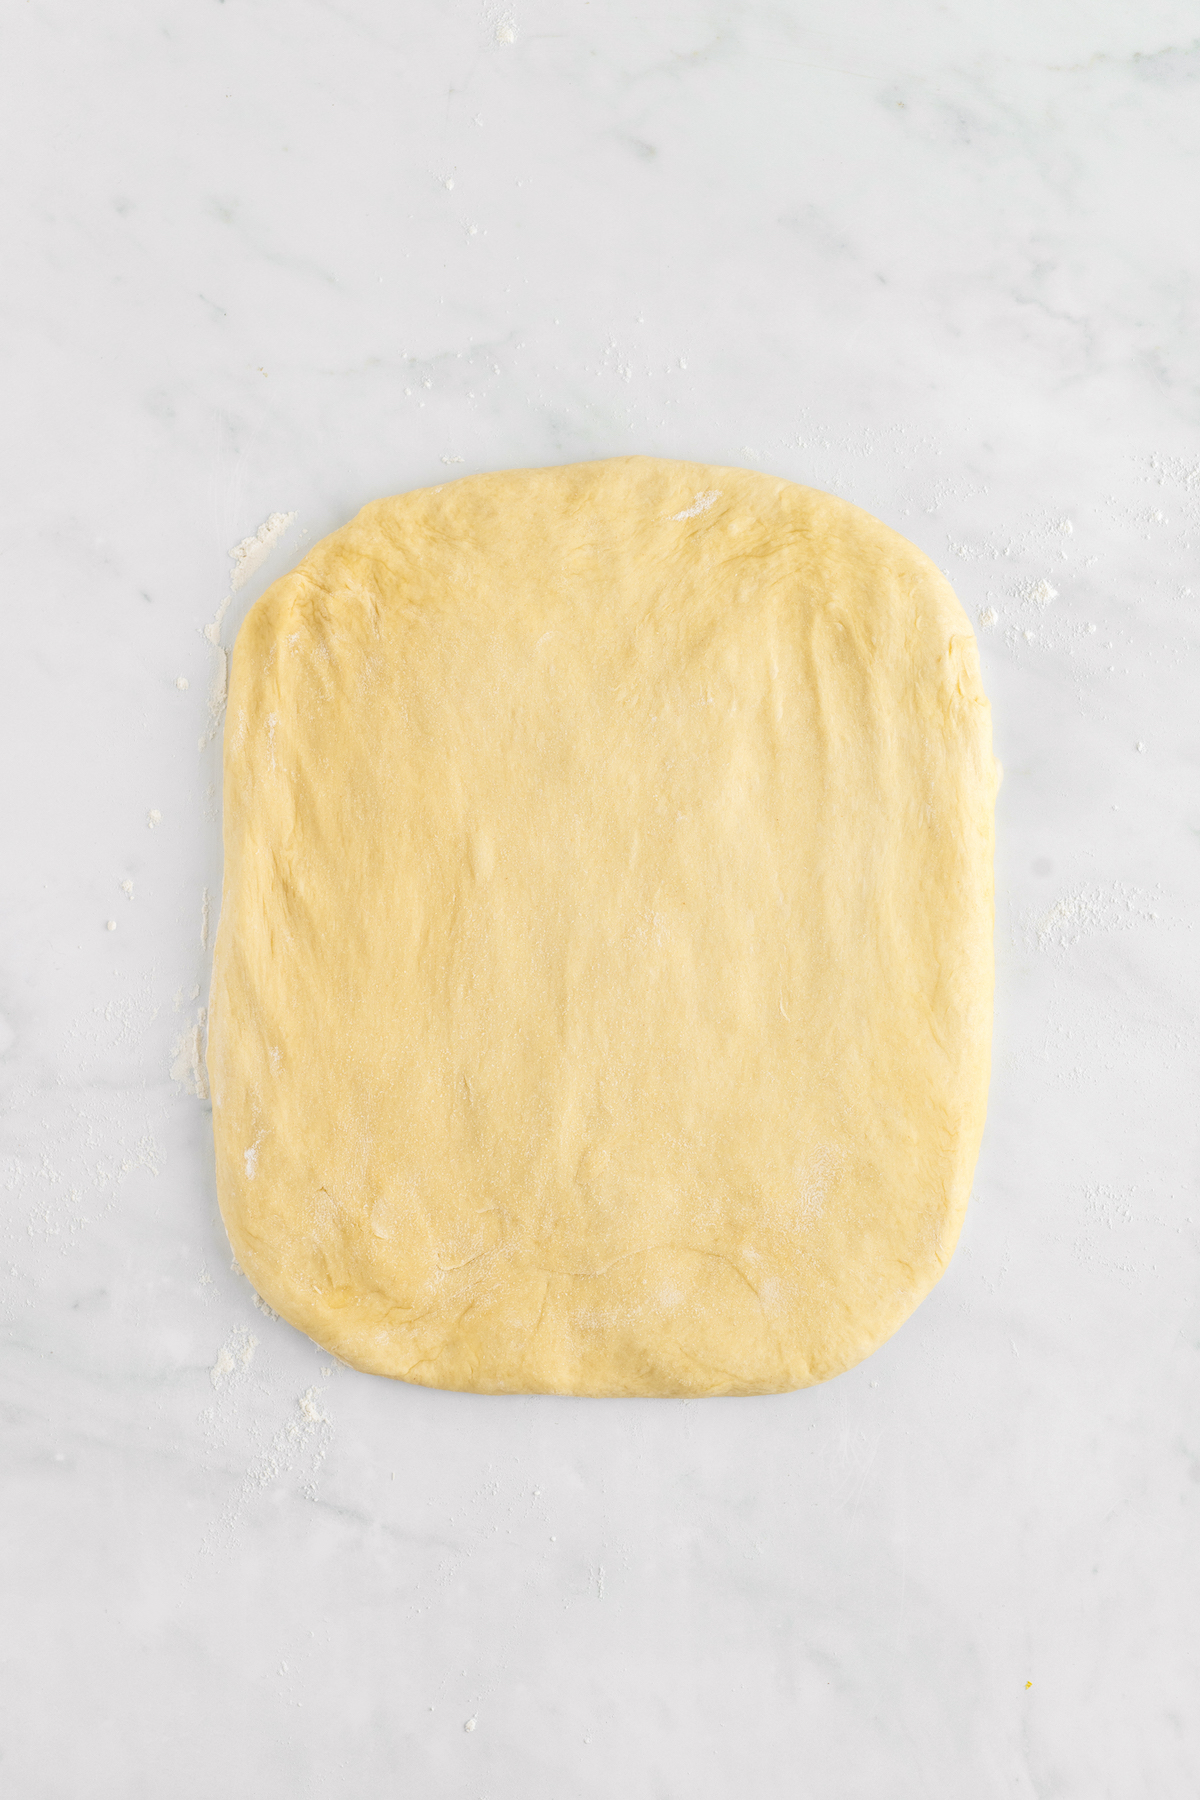 A rectangle of dough patted out on a work surface.